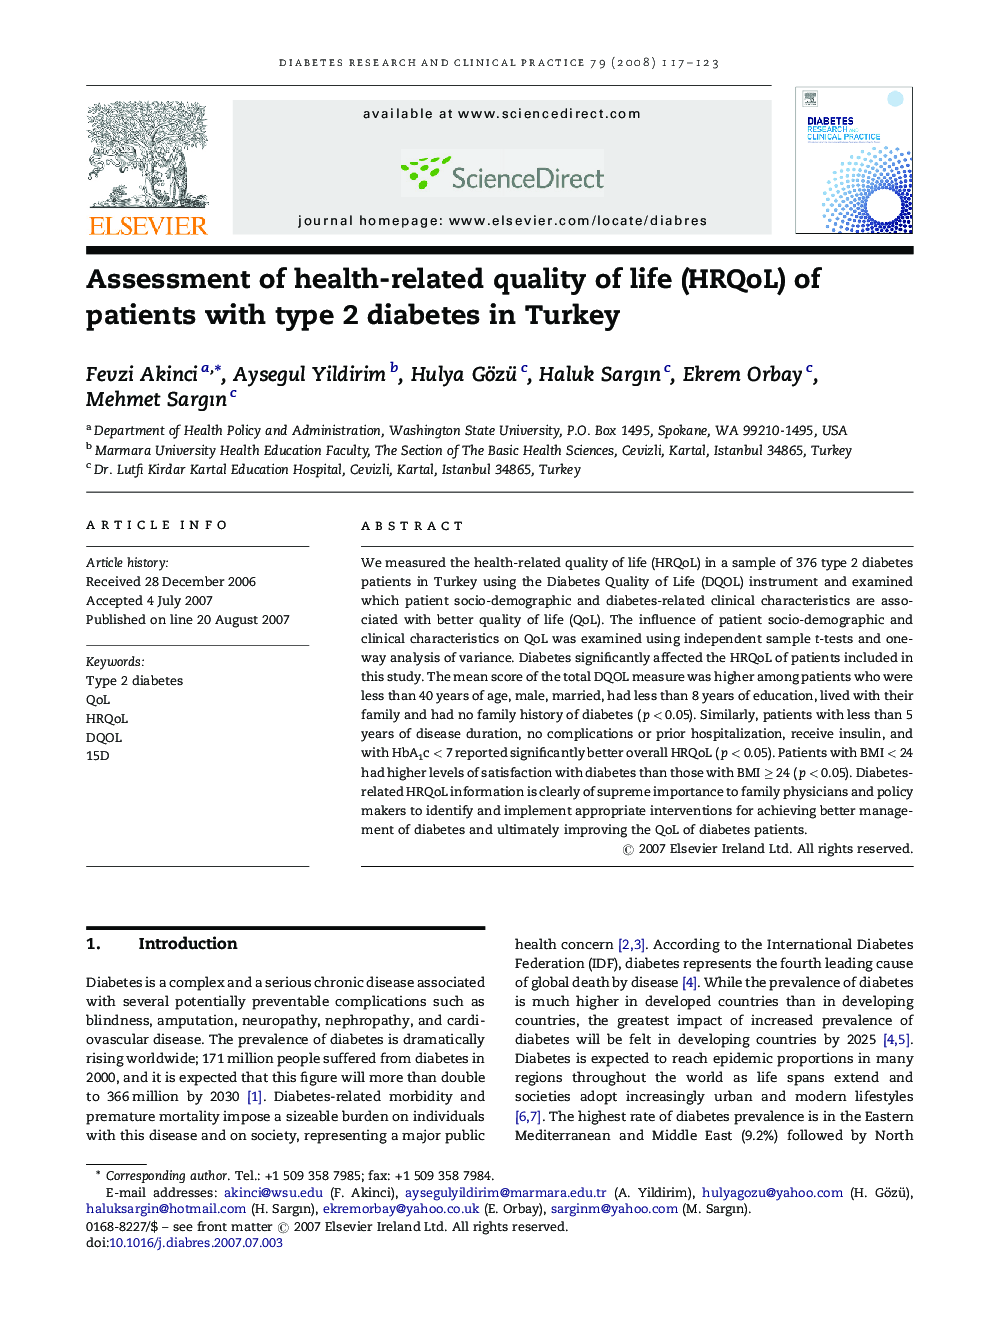 Assessment of health-related quality of life (HRQoL) of patients with type 2 diabetes in Turkey